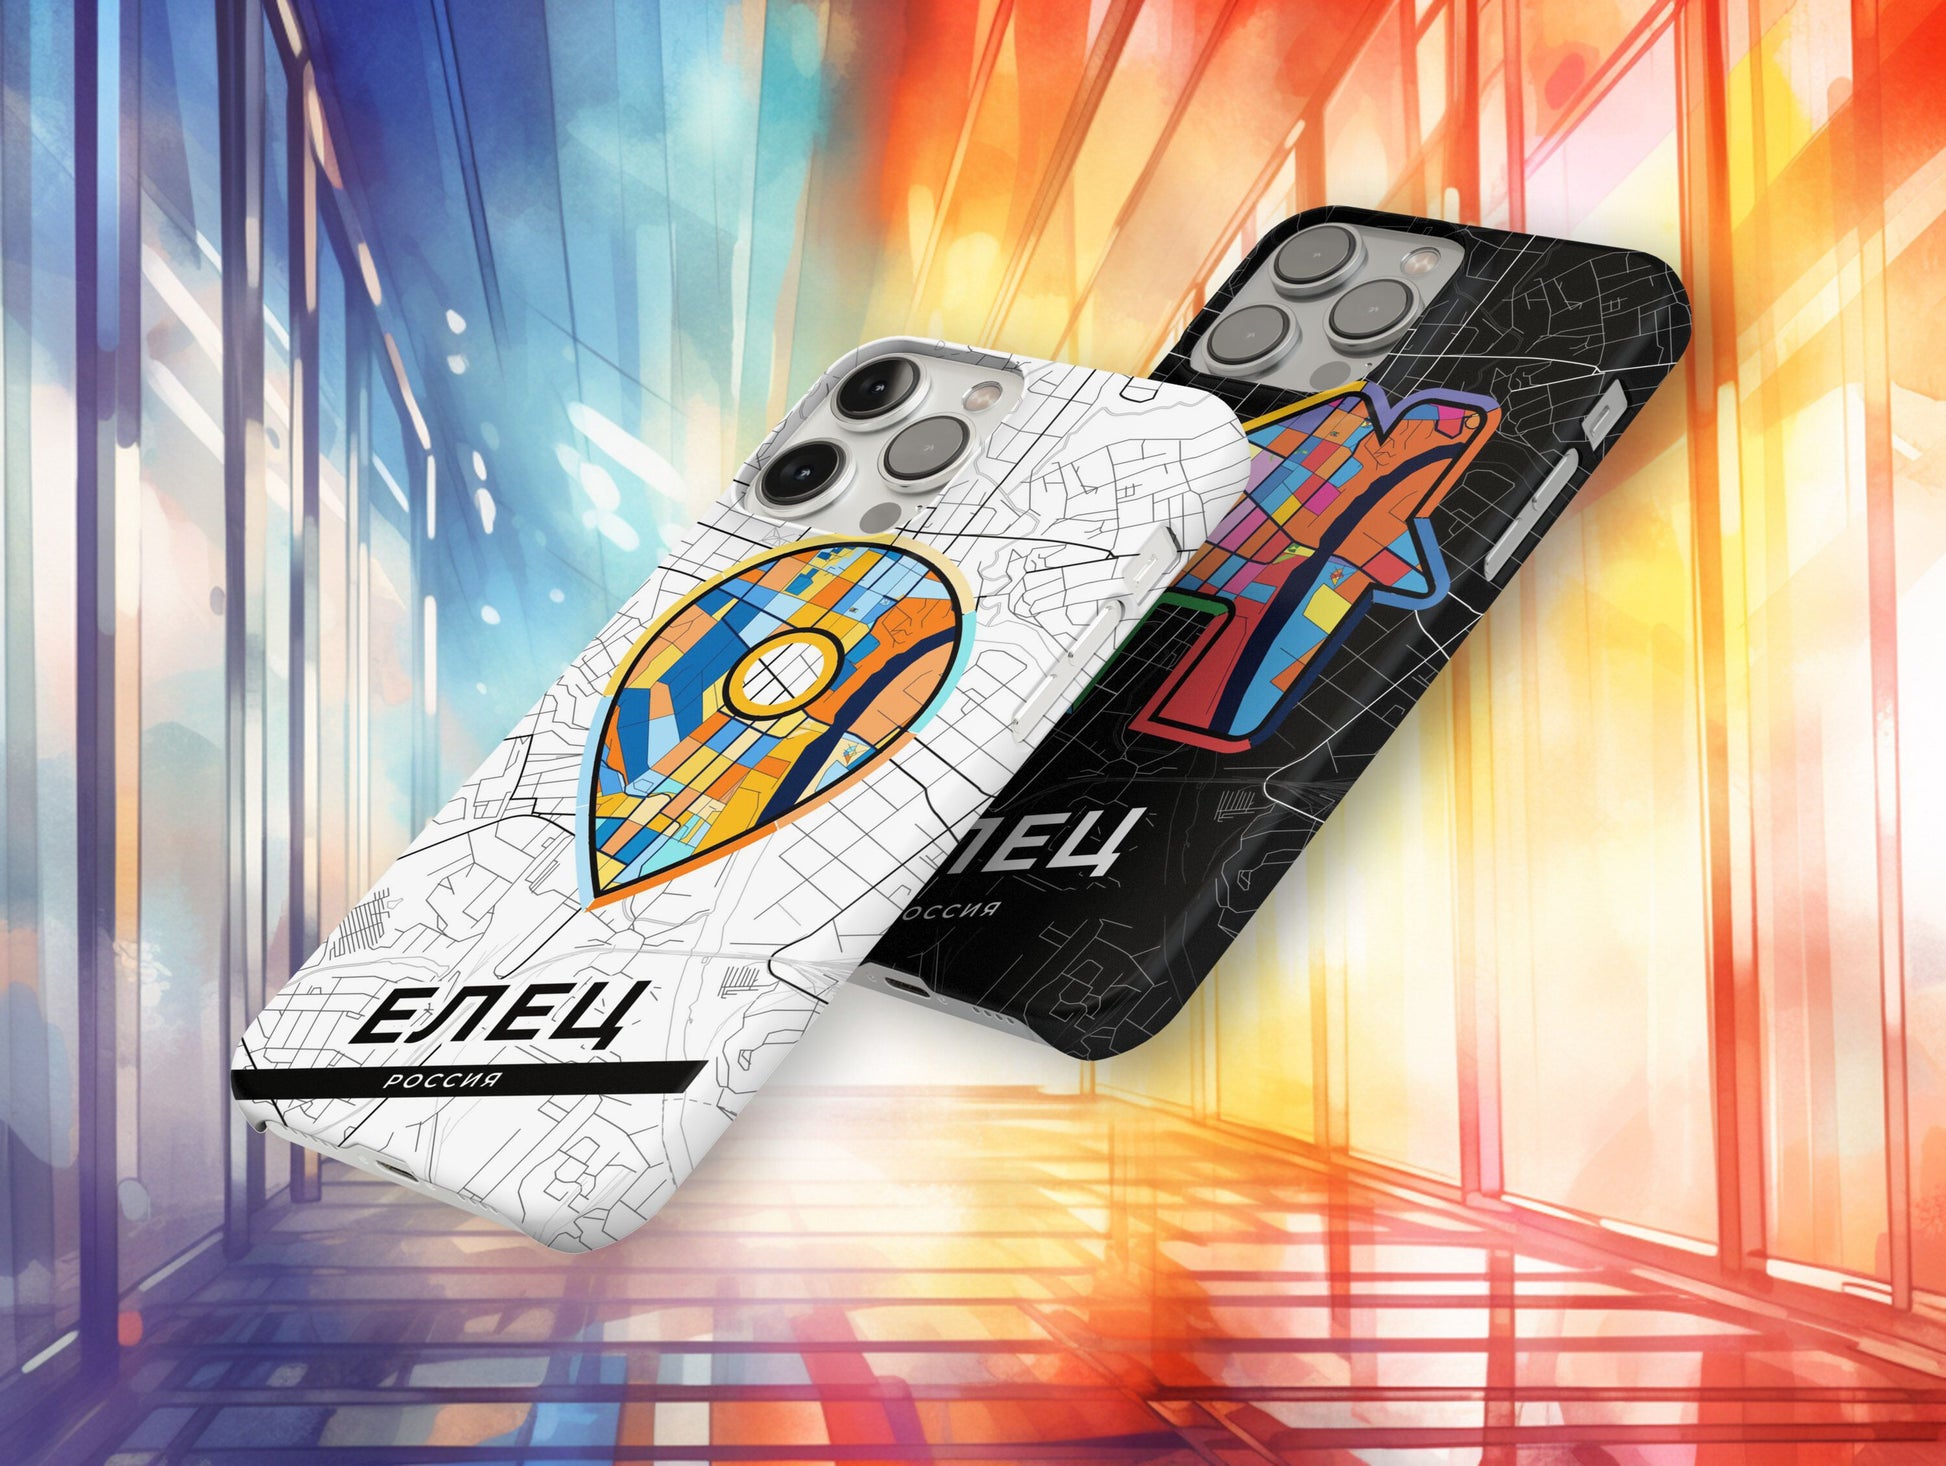 Yelets Russia slim phone case with colorful icon